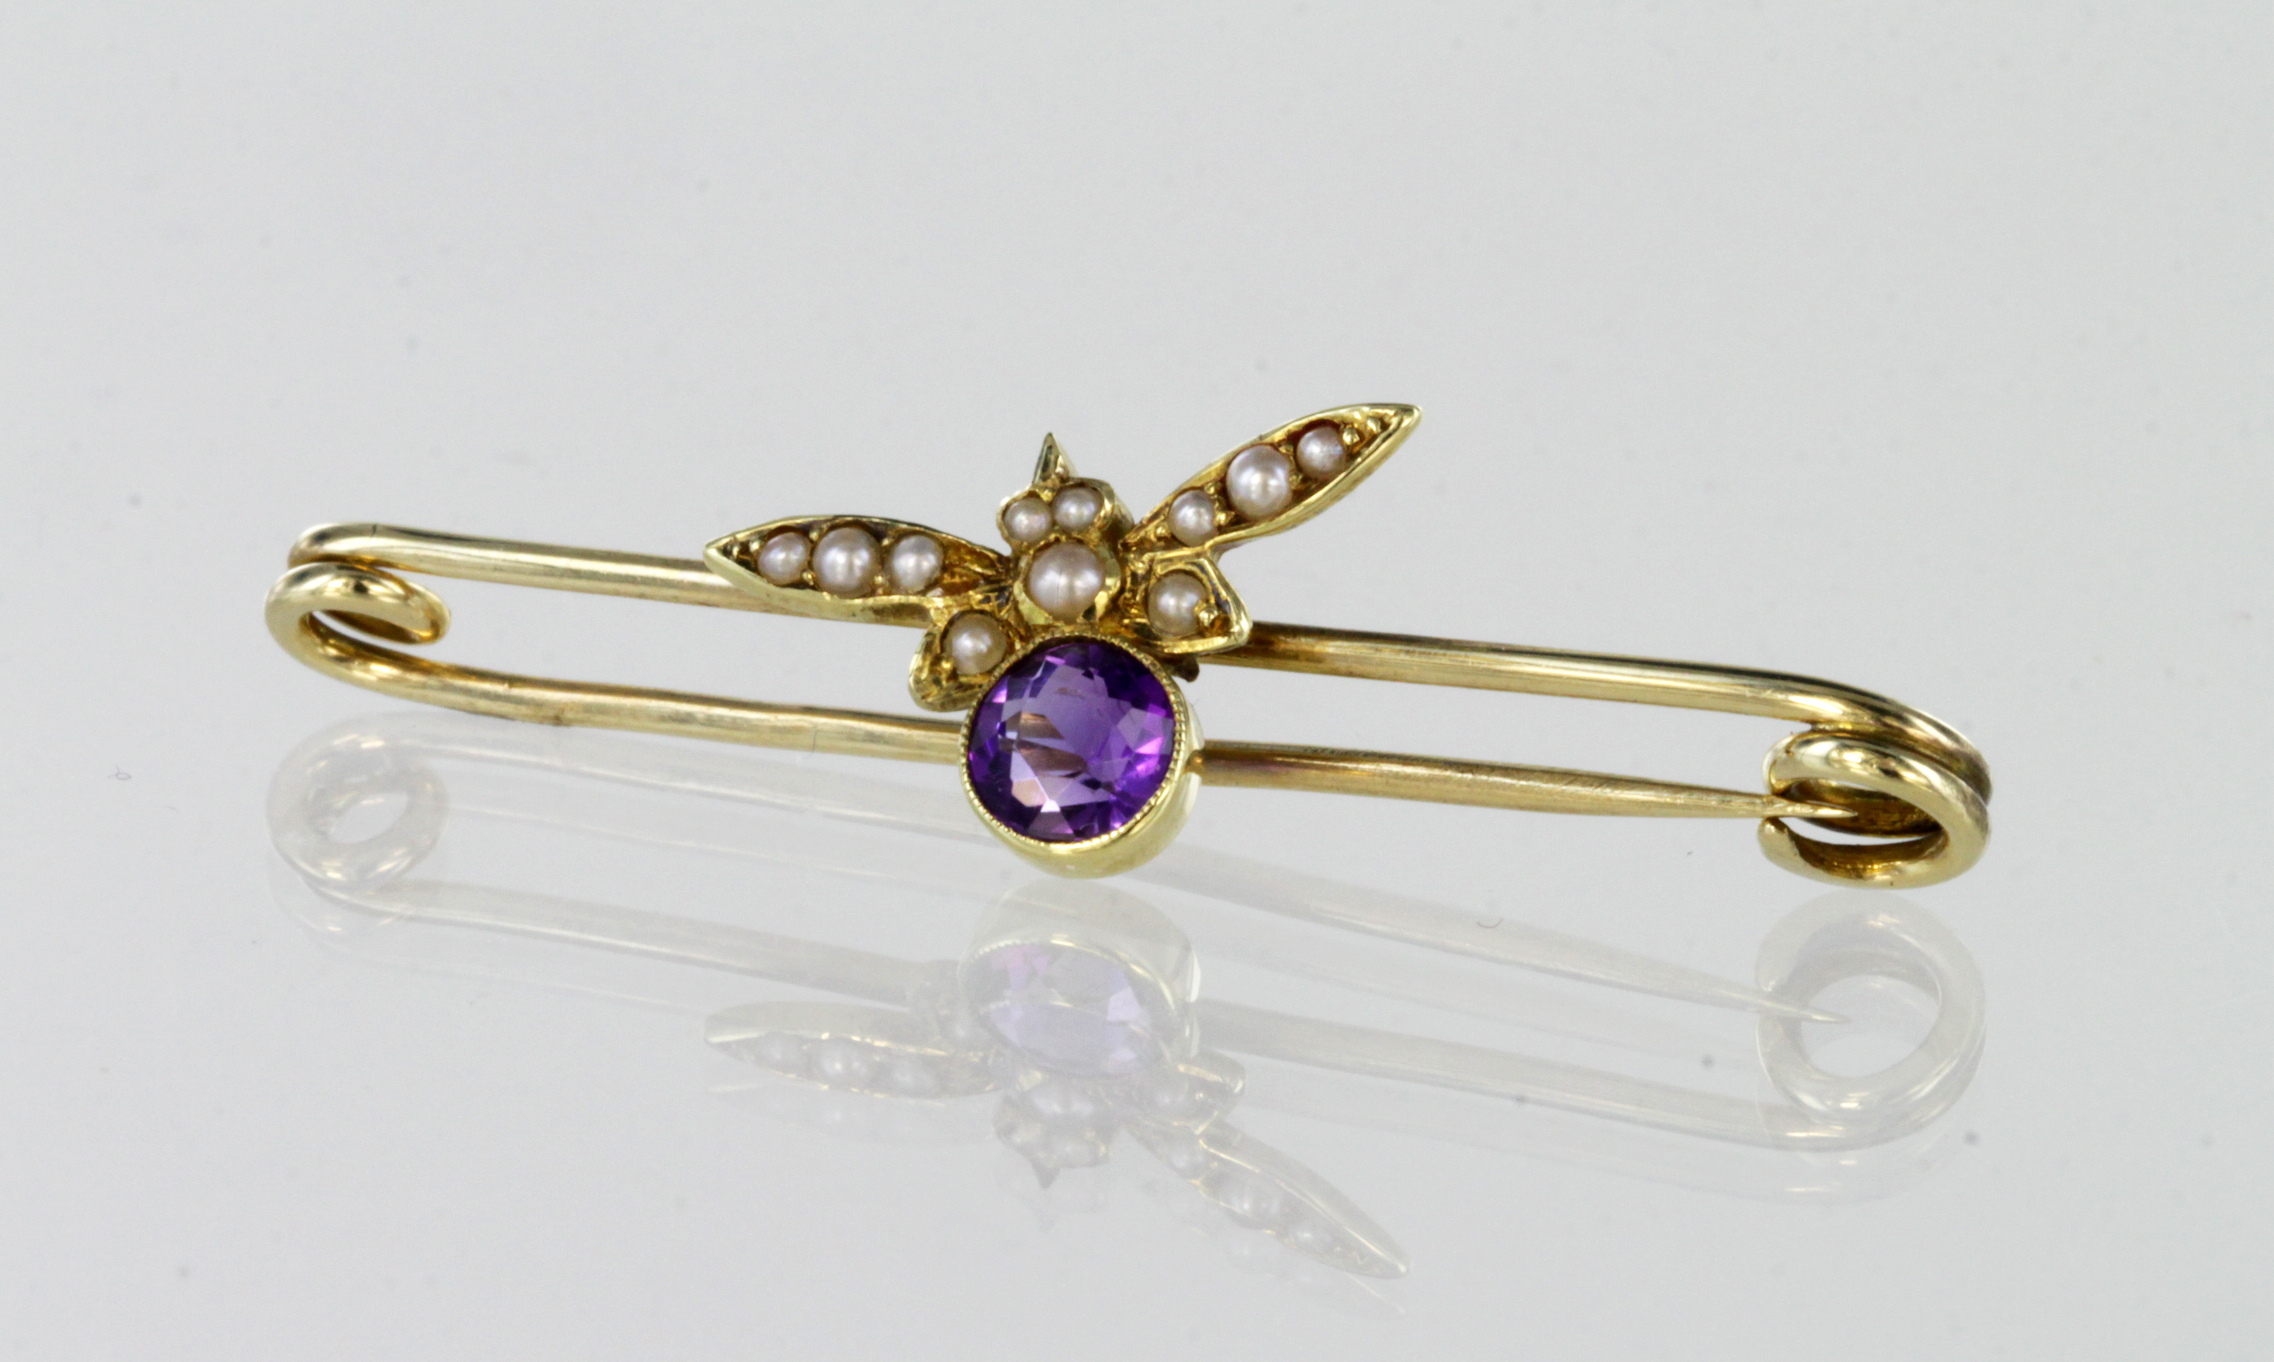 9ct yellow gold bee brooch set with amethyst and pearls, weight 1.8g